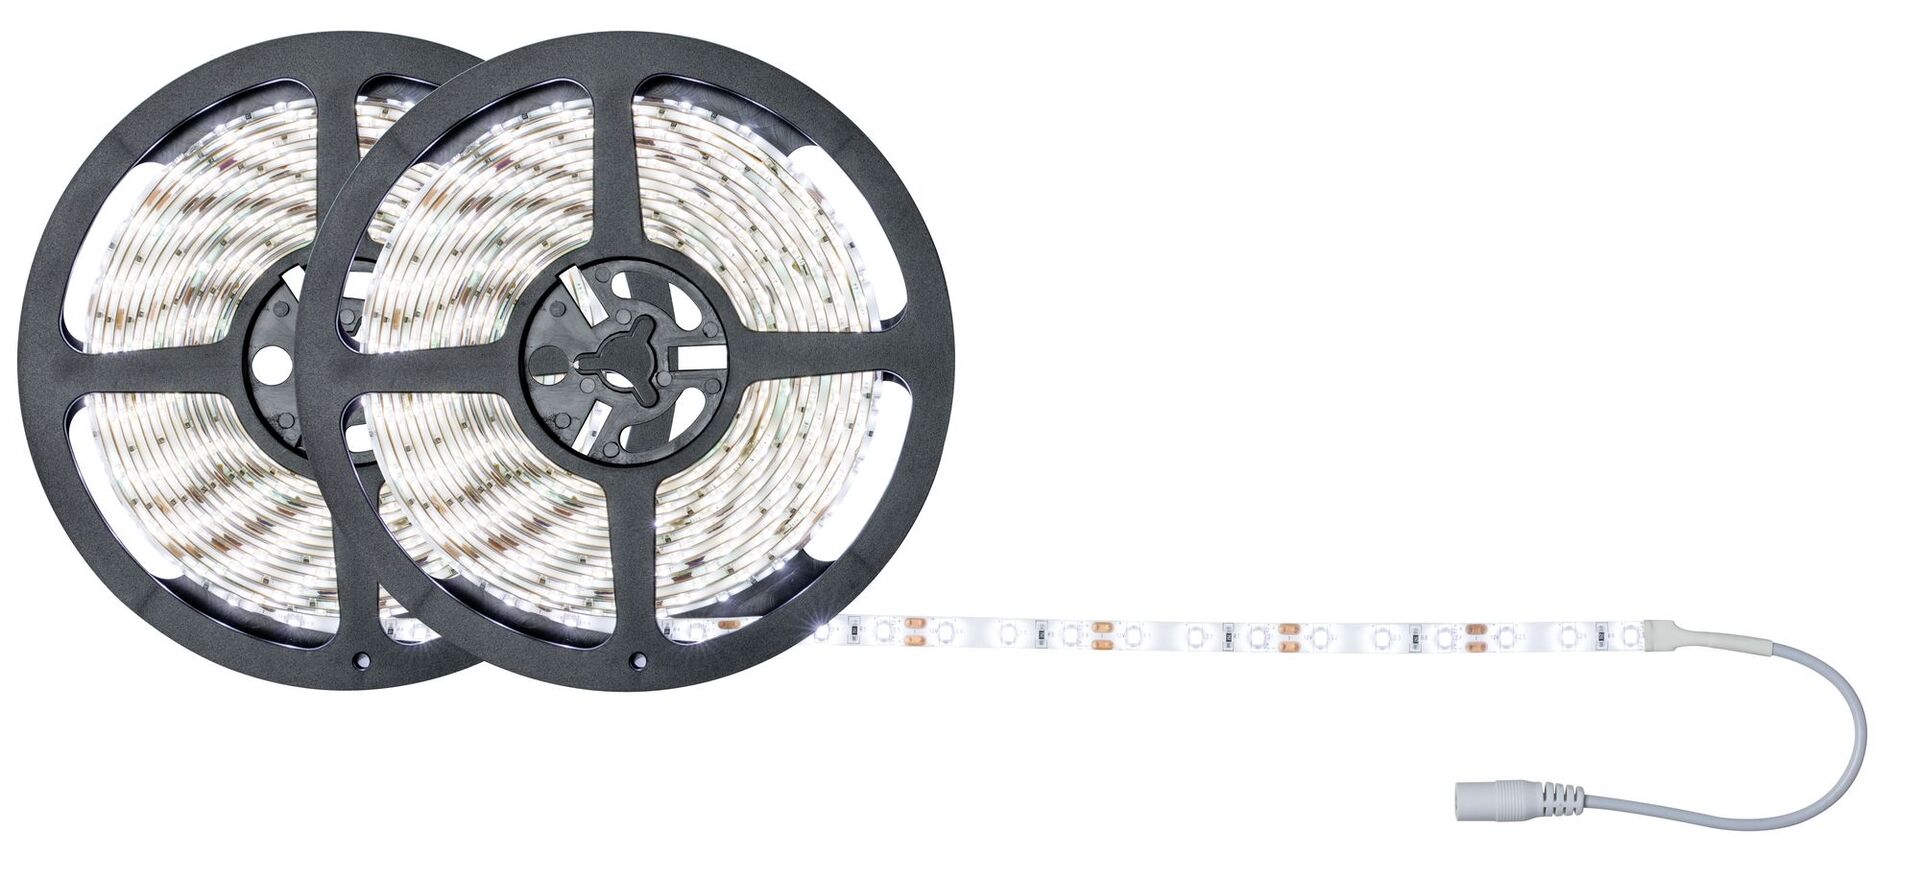 SimpLED LED Strip Tageslicht